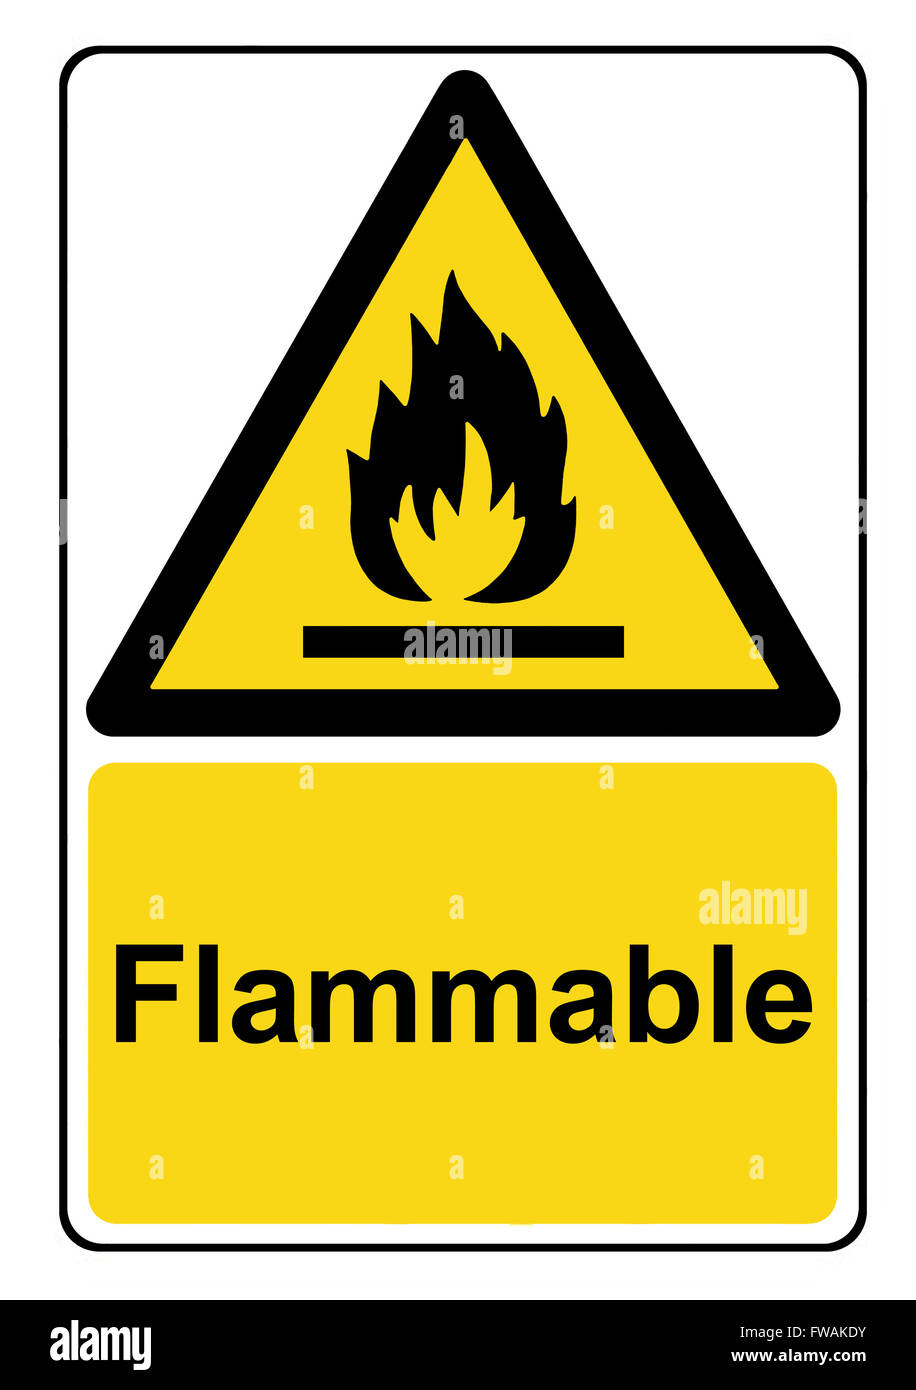 Flammable substances yellow warning sign Stock Photo